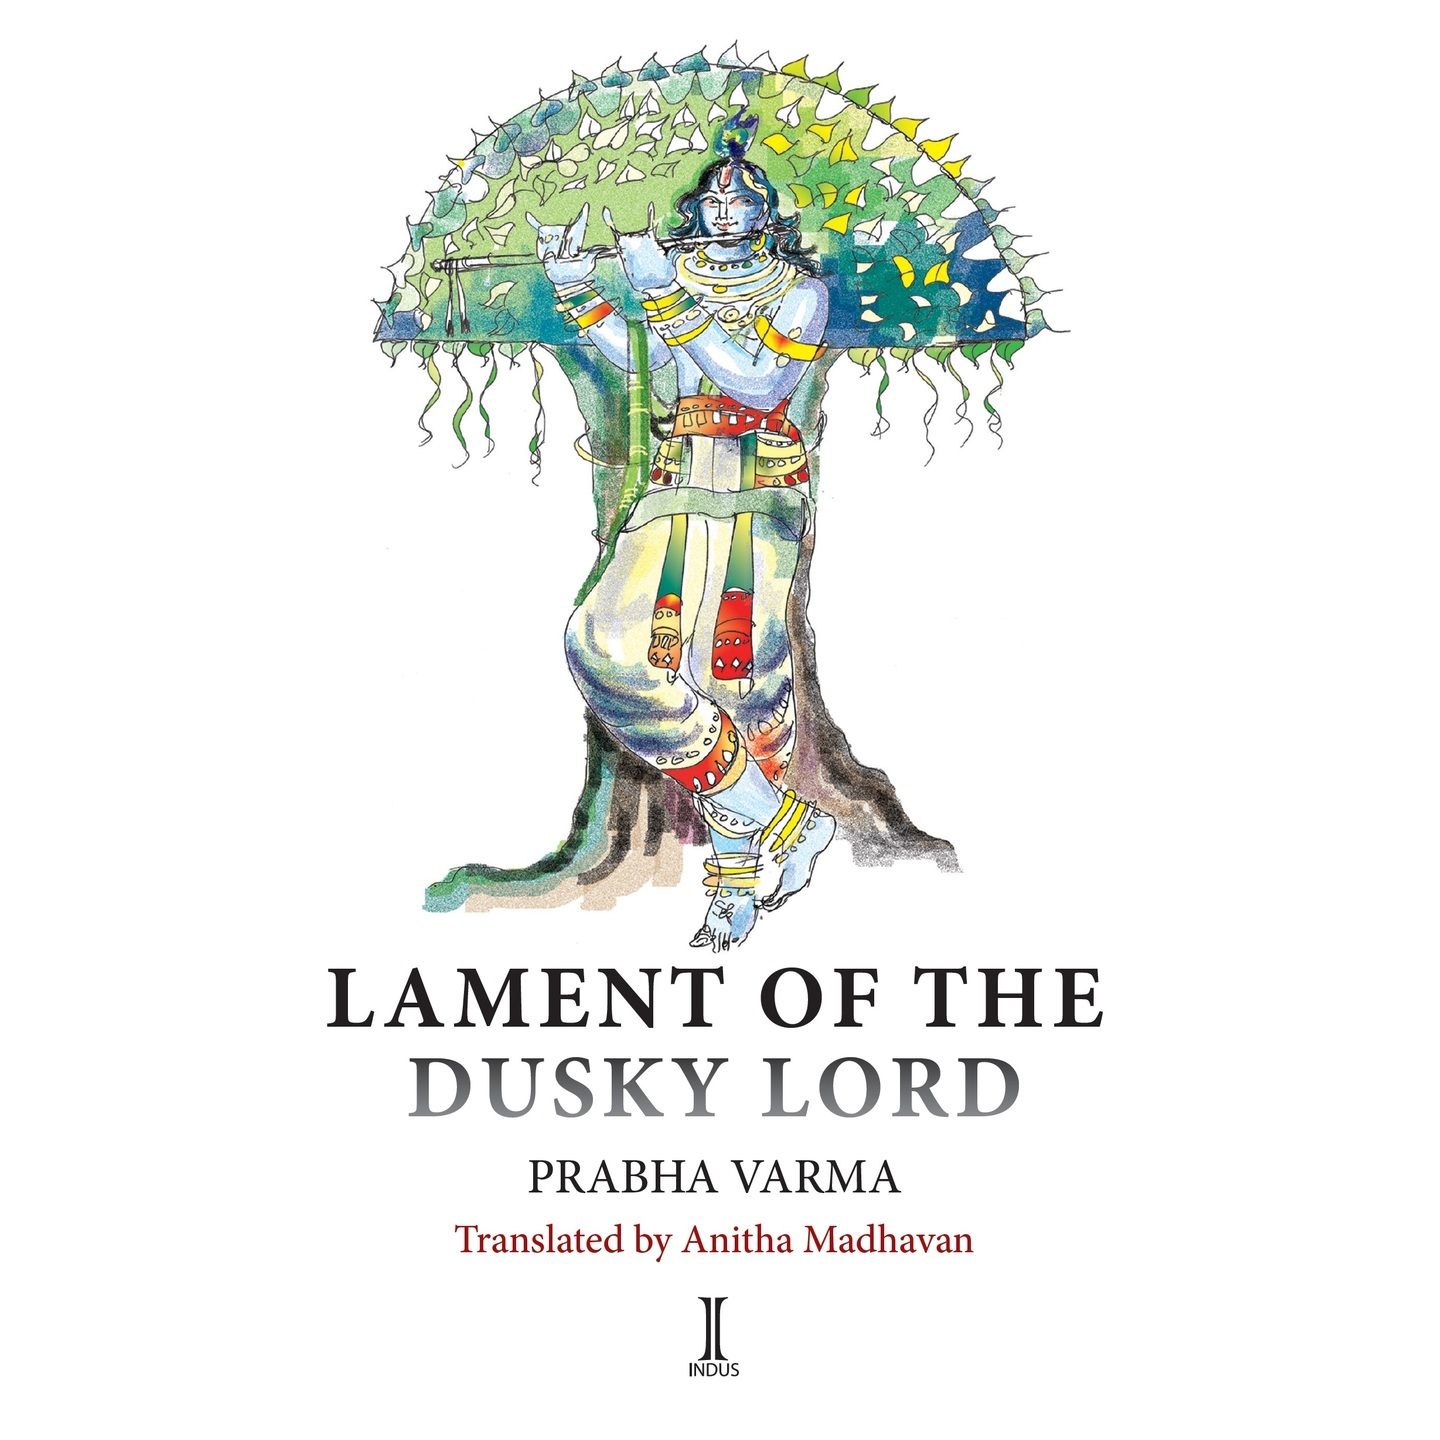 Lament of the Dusky Lord